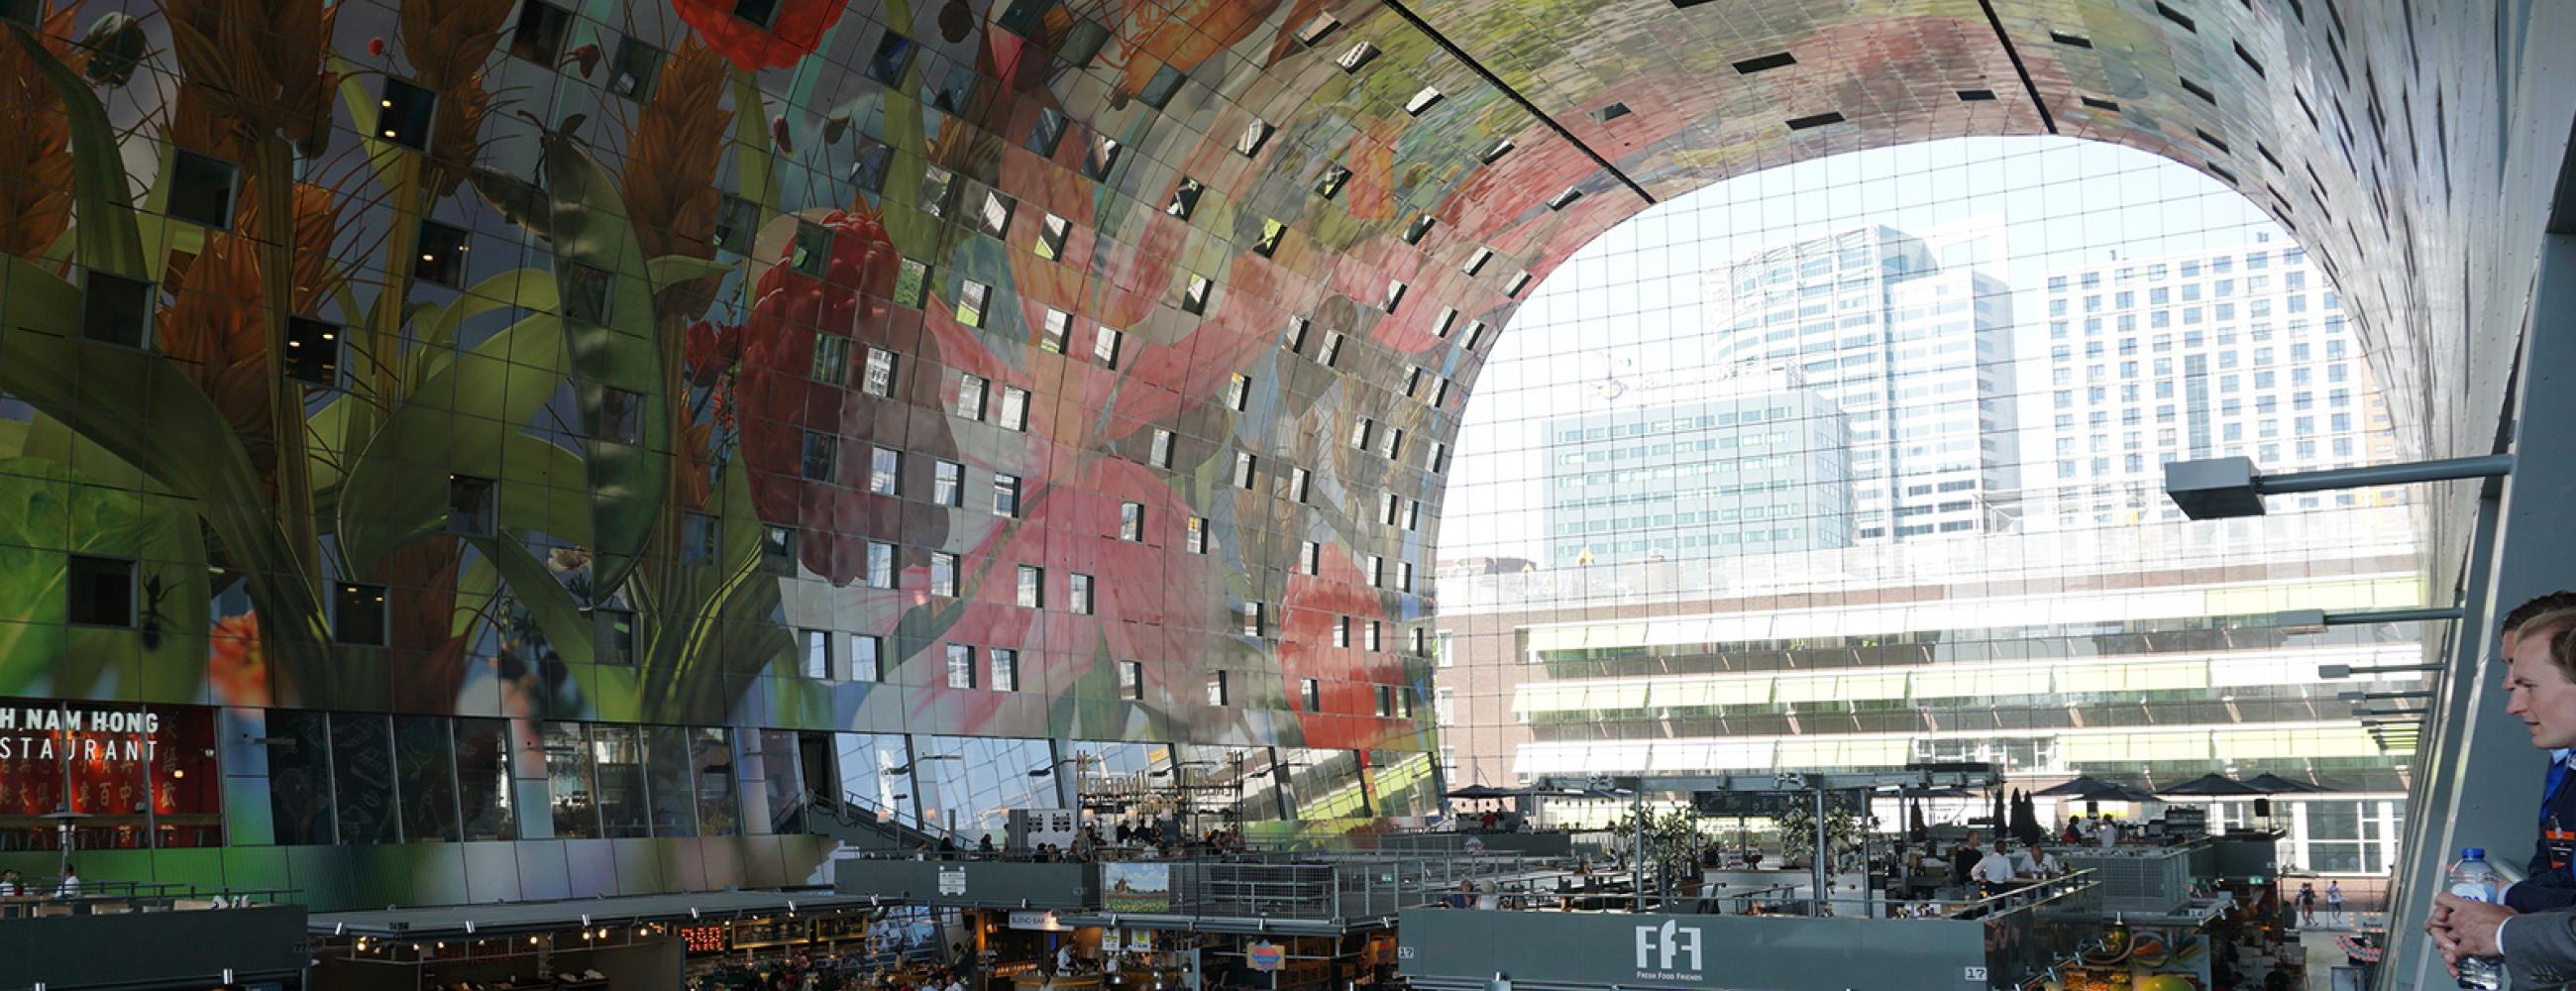 Tour - Markthal - Young Professionals Seminar 2015